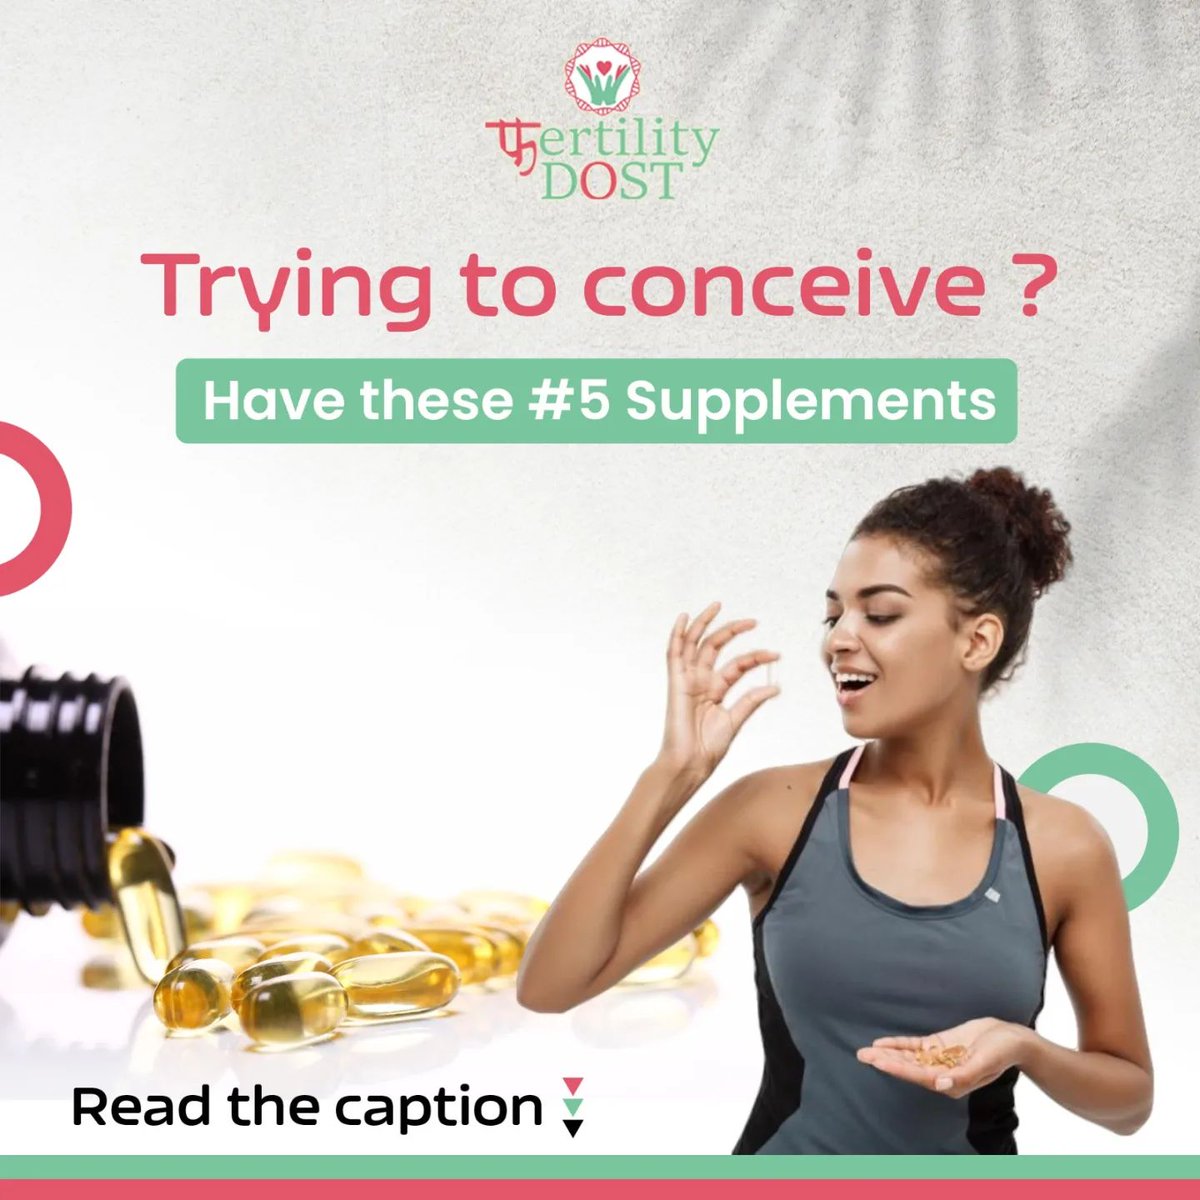 When it comes to increasing your conception odds every month, diet is everything!  The best way to improve fertility health is adding fertility supplements to your diet 💊👇🤰
To know more click link - bit.ly/3l5aGRL

#fertilitydost #tryingtogetpregnant
#tryingtoconceive